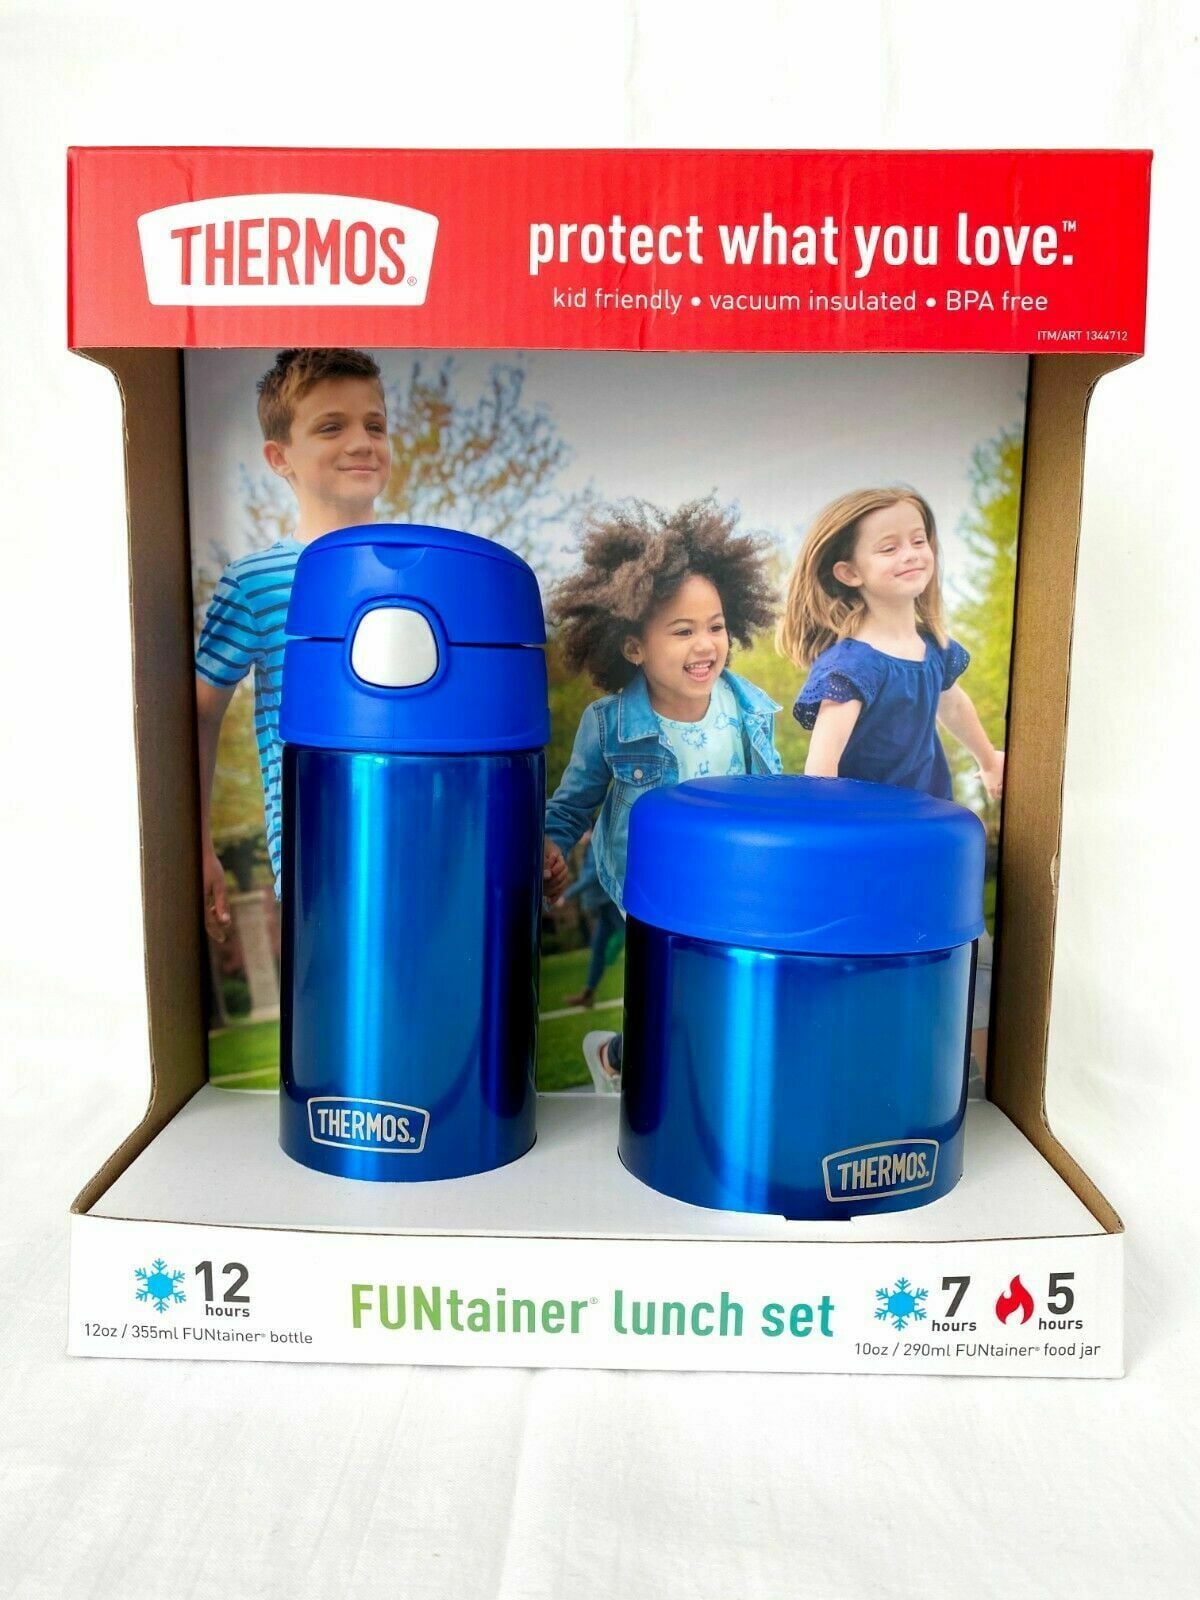 NEW Thermos FUNtainer Bottle and Food Jar Lunch Set 